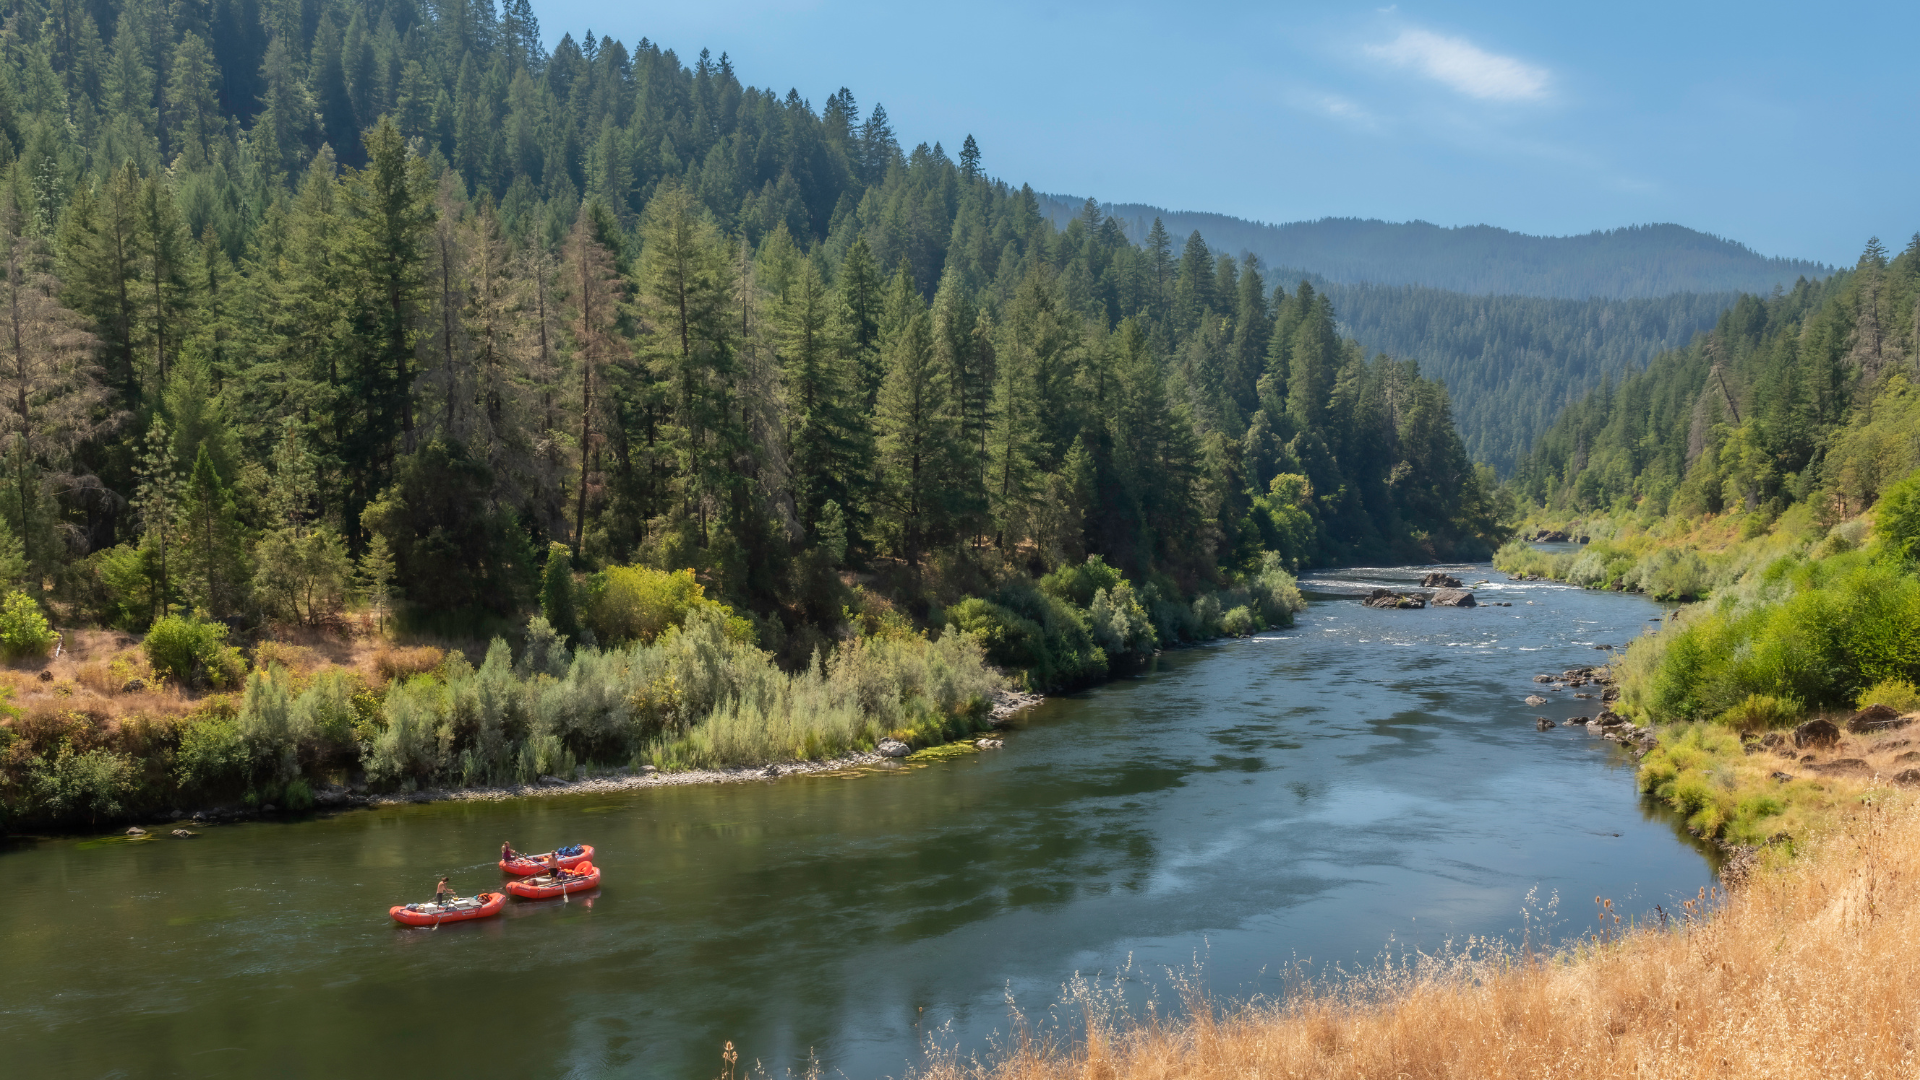 Kayaking on a US river protected by the wild and scenic rivers act